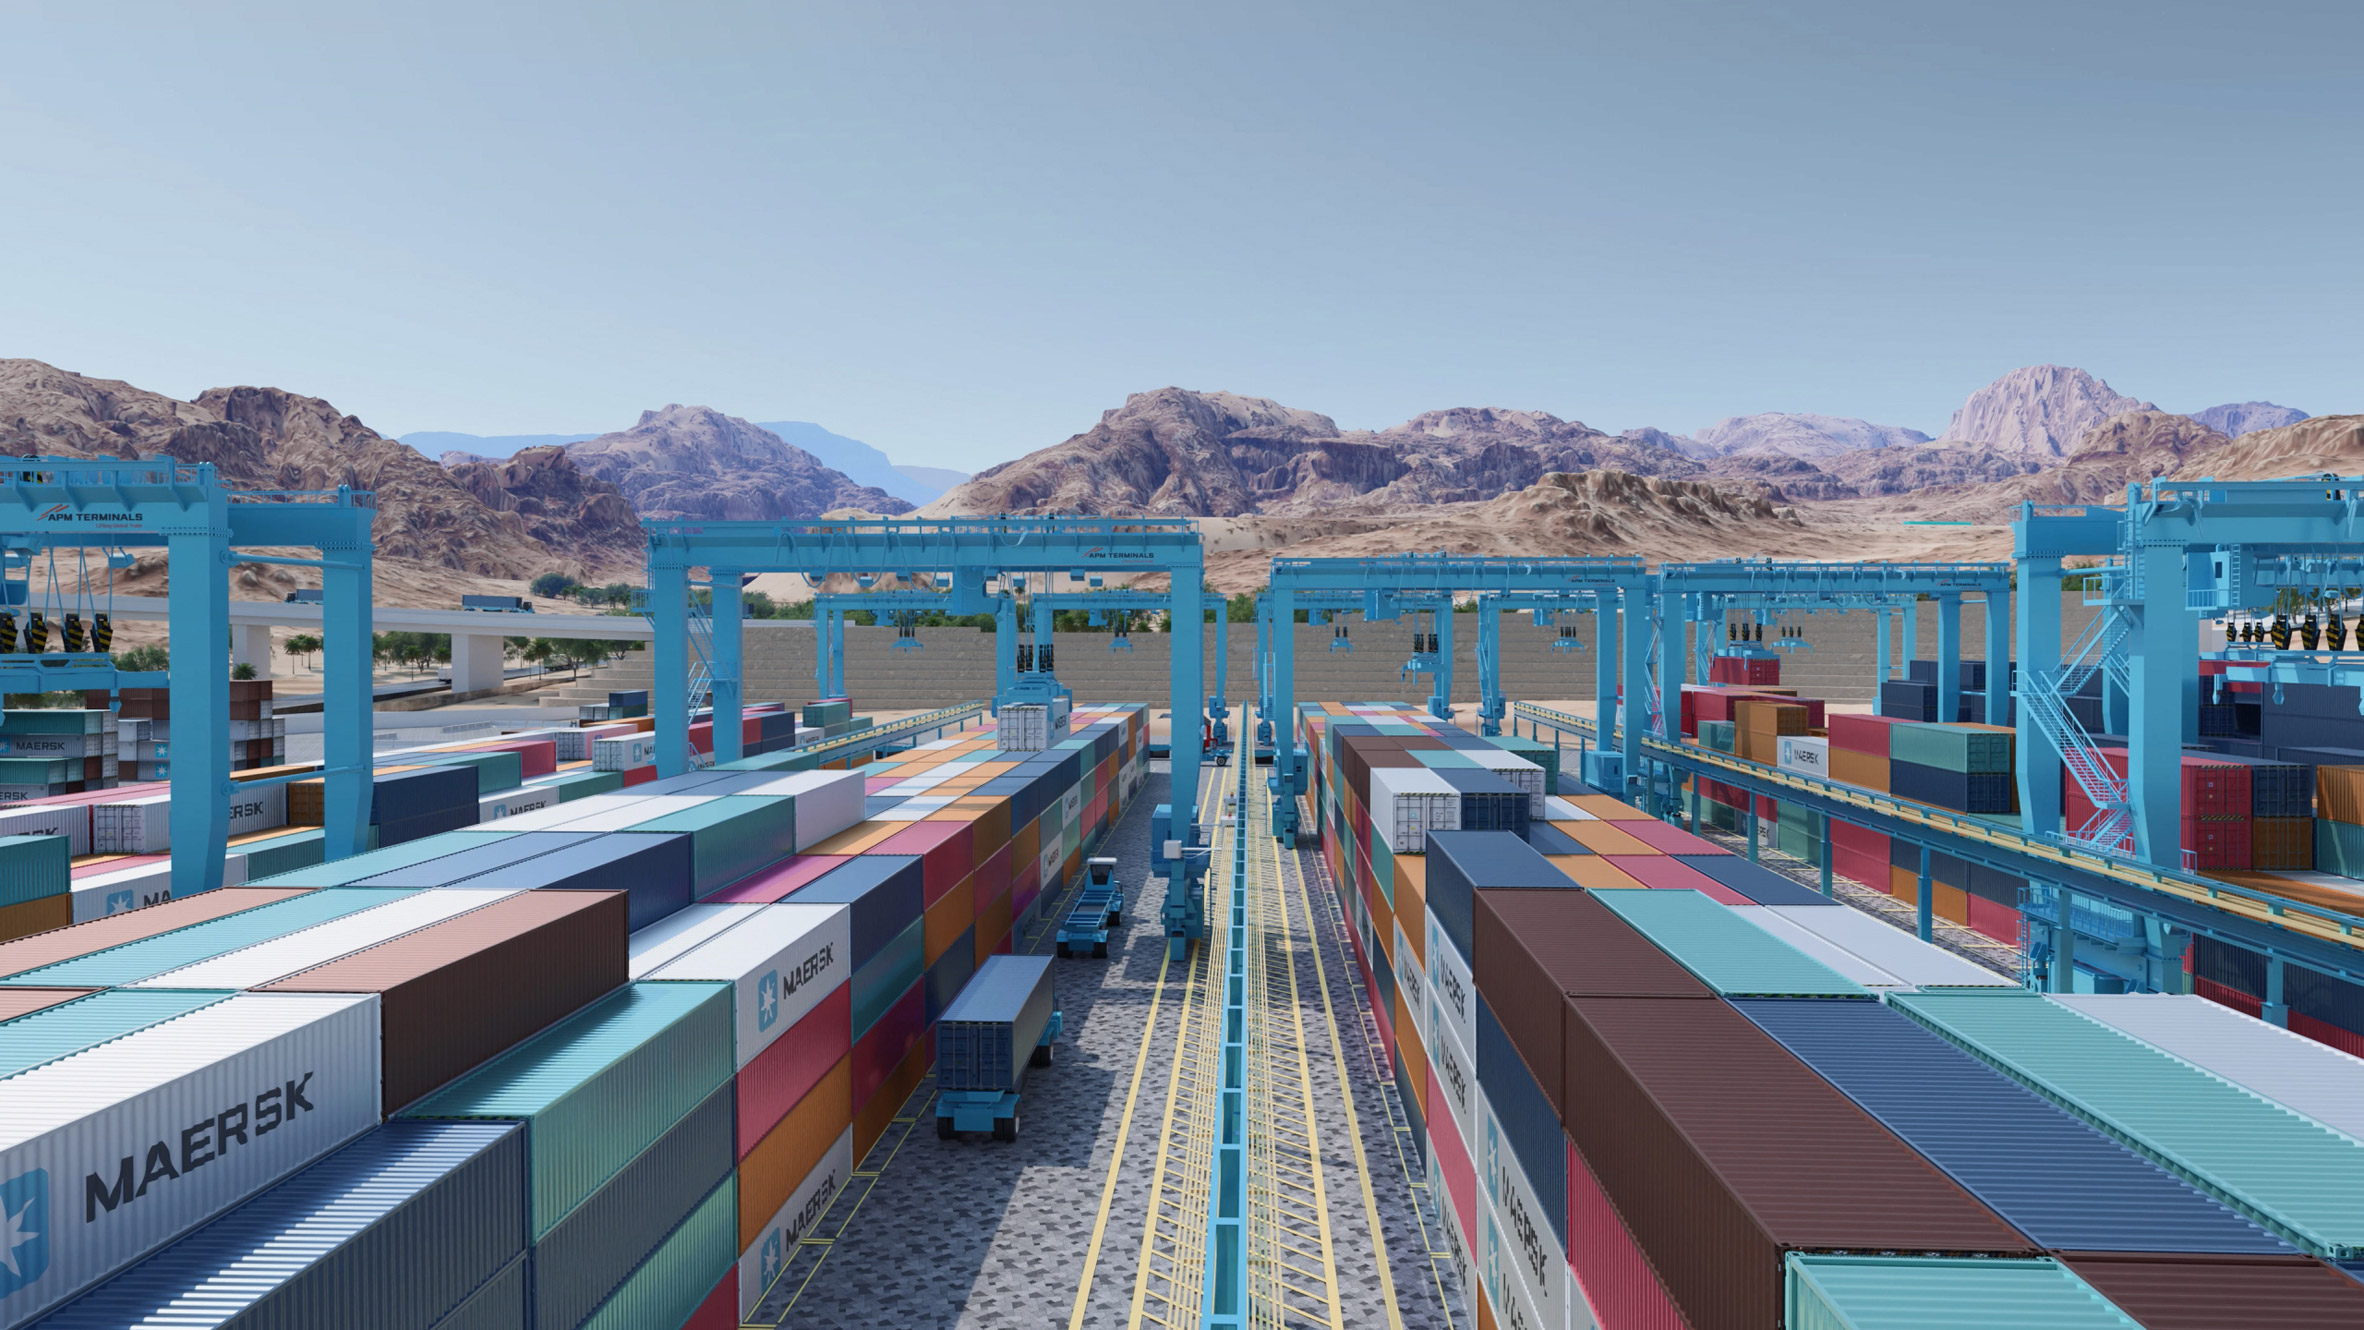 Shipping containers in Jordan port